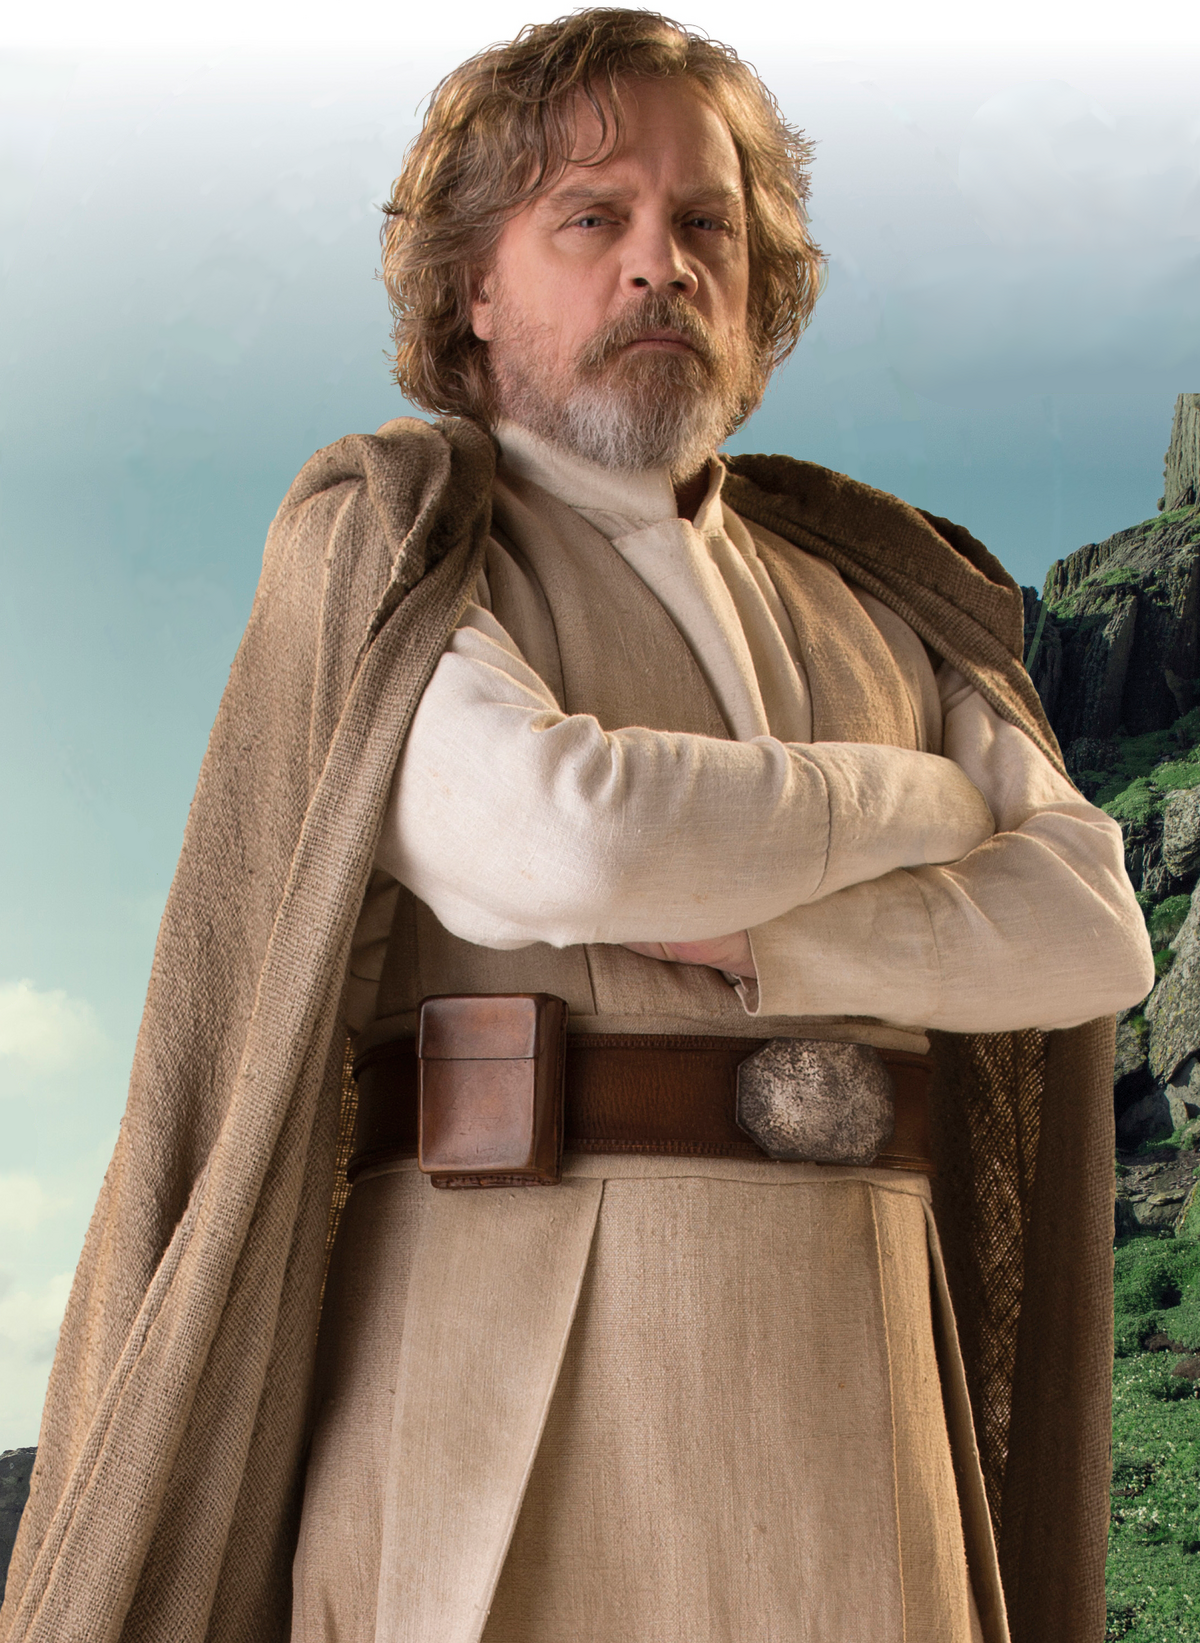 The astronomical amount Mark Hamill charged for 30 seconds in a 'Star Wars'  movie